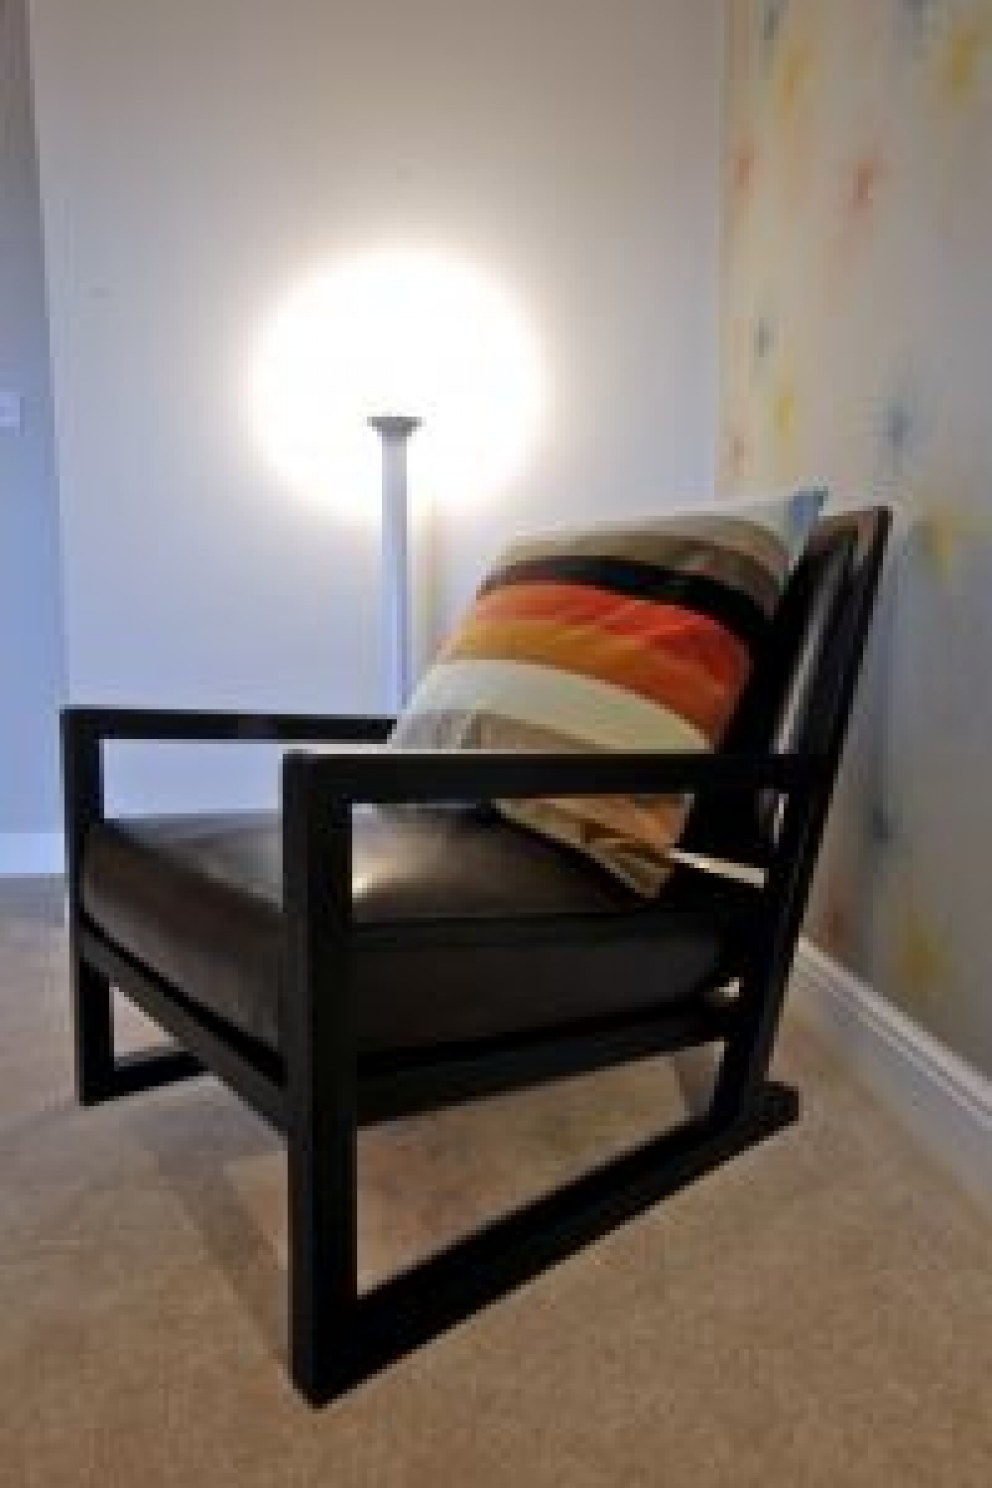 Stunning penthouse in Didsbury, Manchester | Chair detail. | Interior Designers